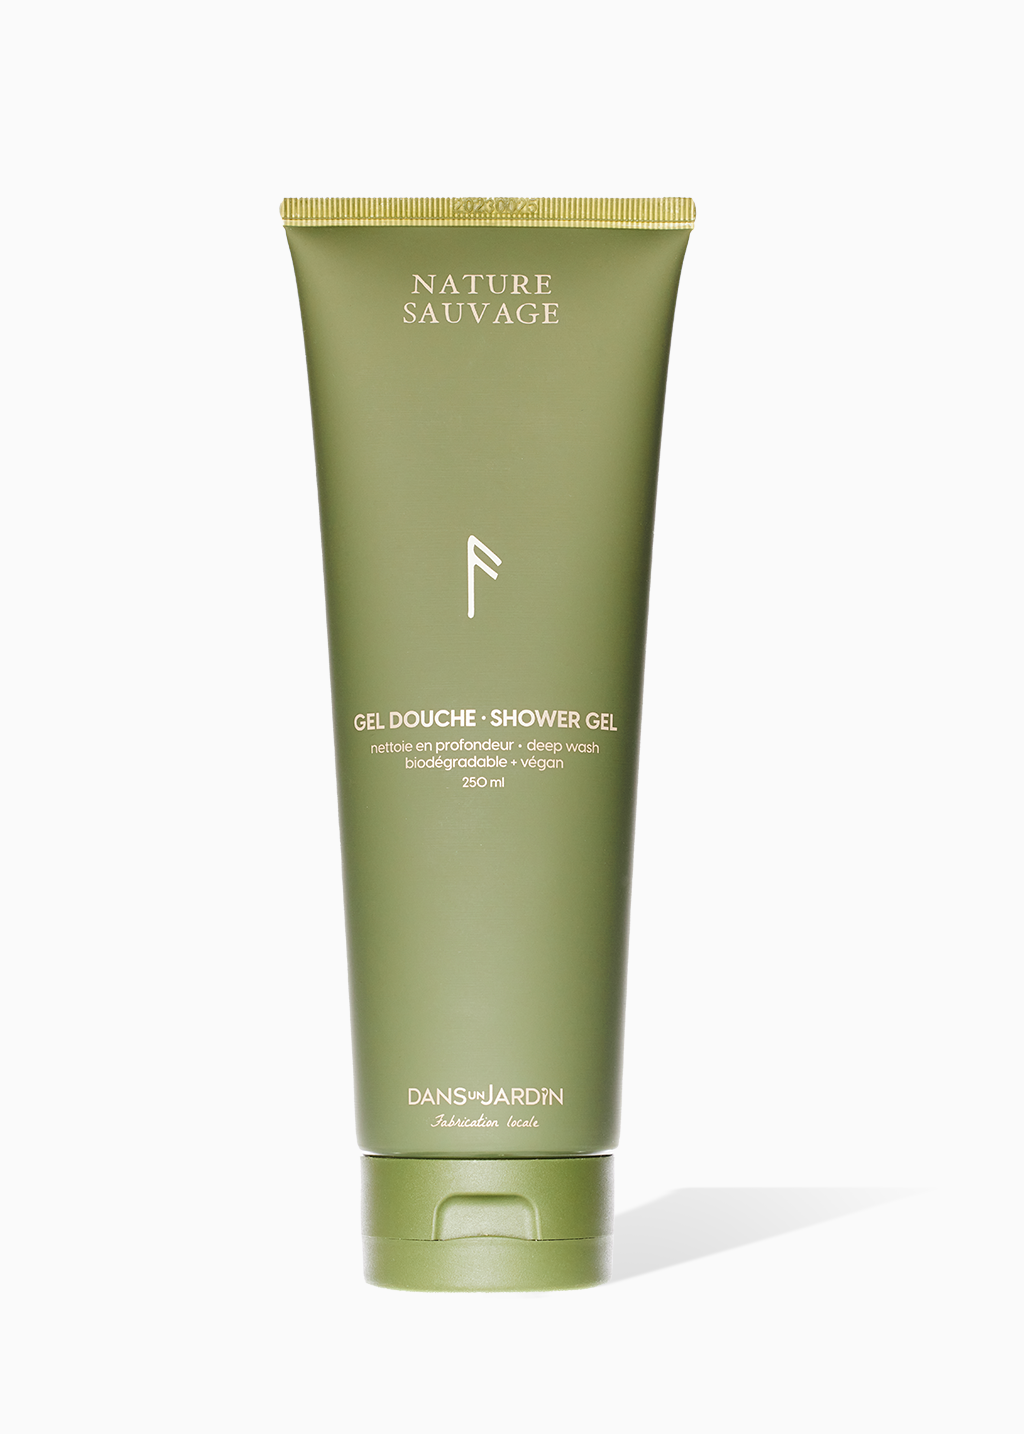 Gel douche - NATURE SAUVAGE